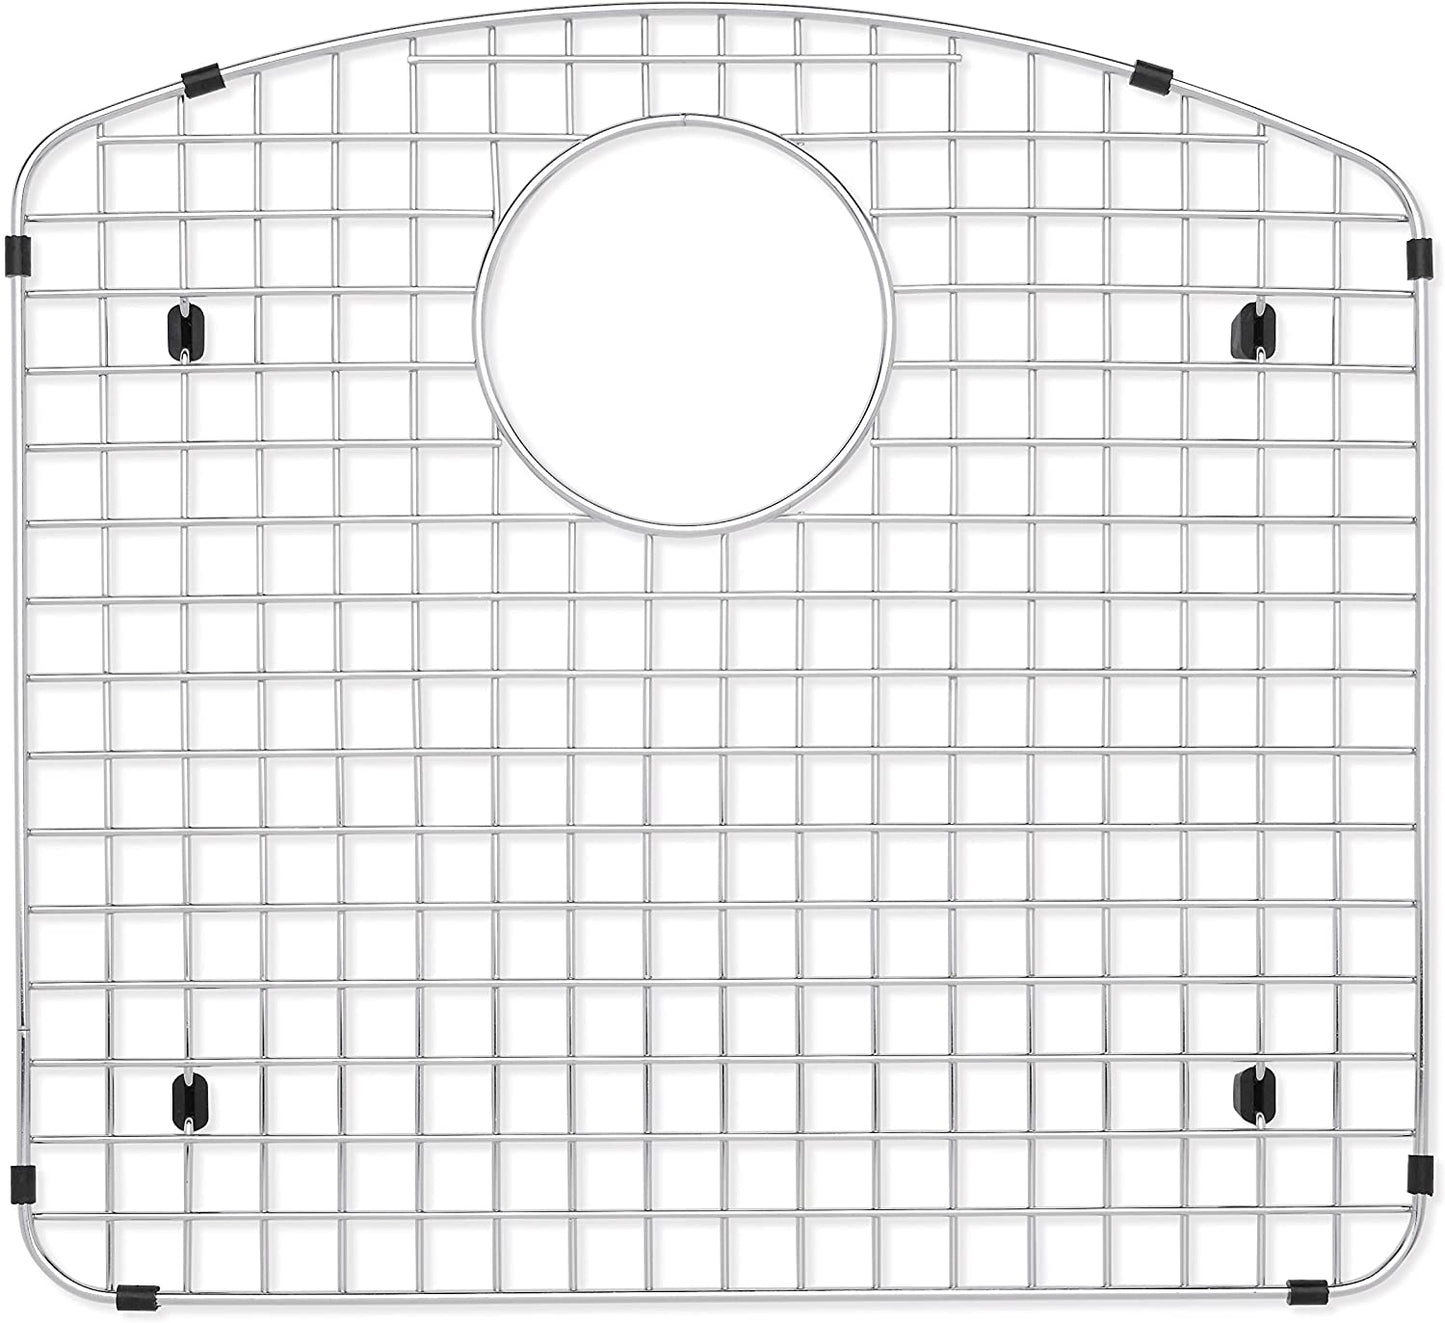 DIAMOND Stainless Steel Kitchen Sink Grid - BLANCO Sink Protector, Large